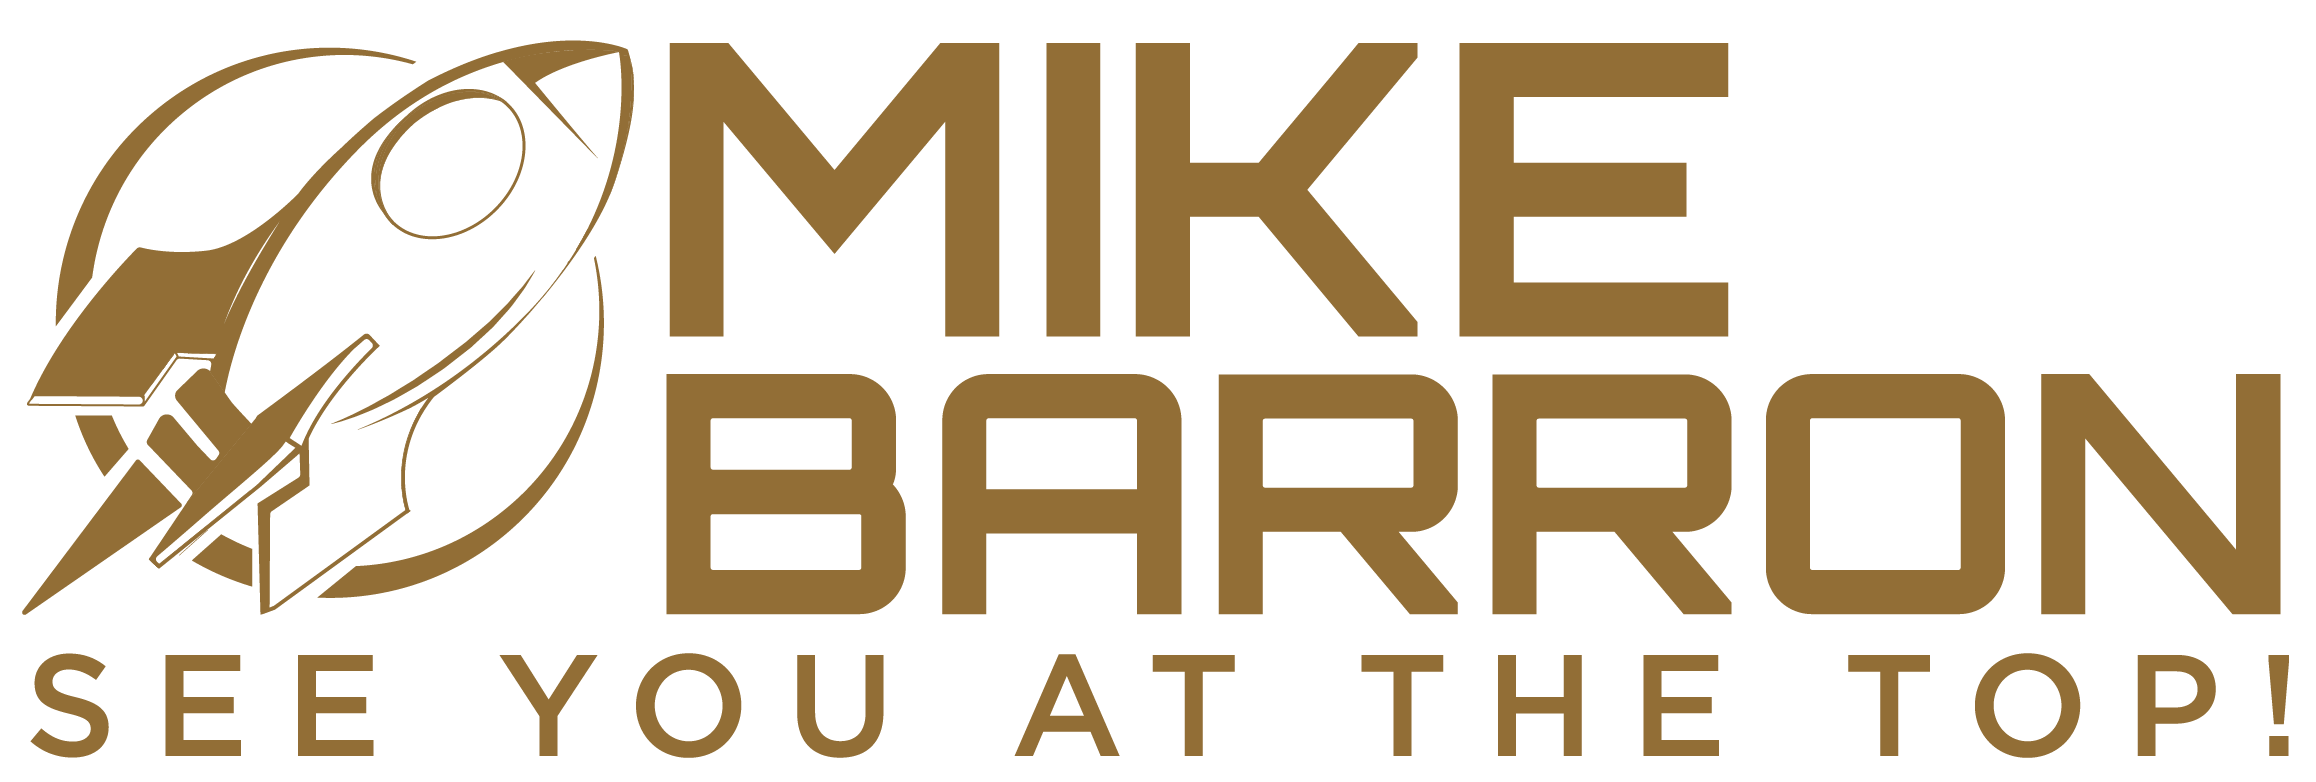 Mike Barron, Limelight Media, Motivated Training Clients, Personal Training Business Development, 2 Comma Club, Two Comma Club, FitPros, Closers, High Ticket Closers, High Ticket Sales, Closing Academy, Virtual Training Masterclass,